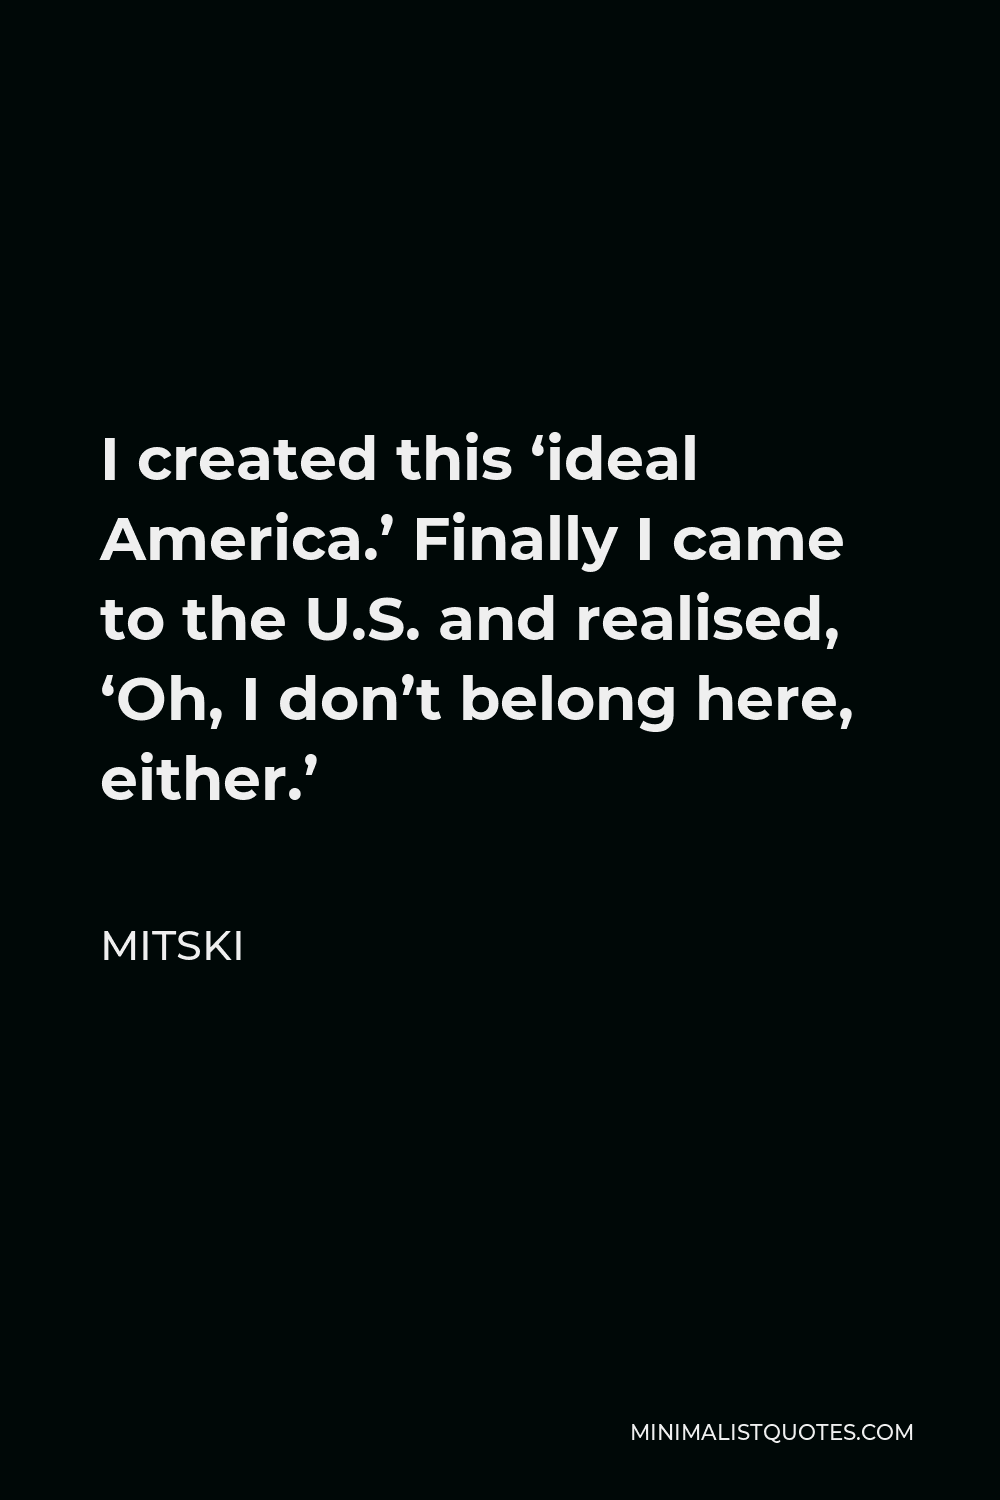 Mitski Quote - I created this ‘ideal America.’ Finally I came to the U.S. and realised, ‘Oh, I don’t belong here, either.’